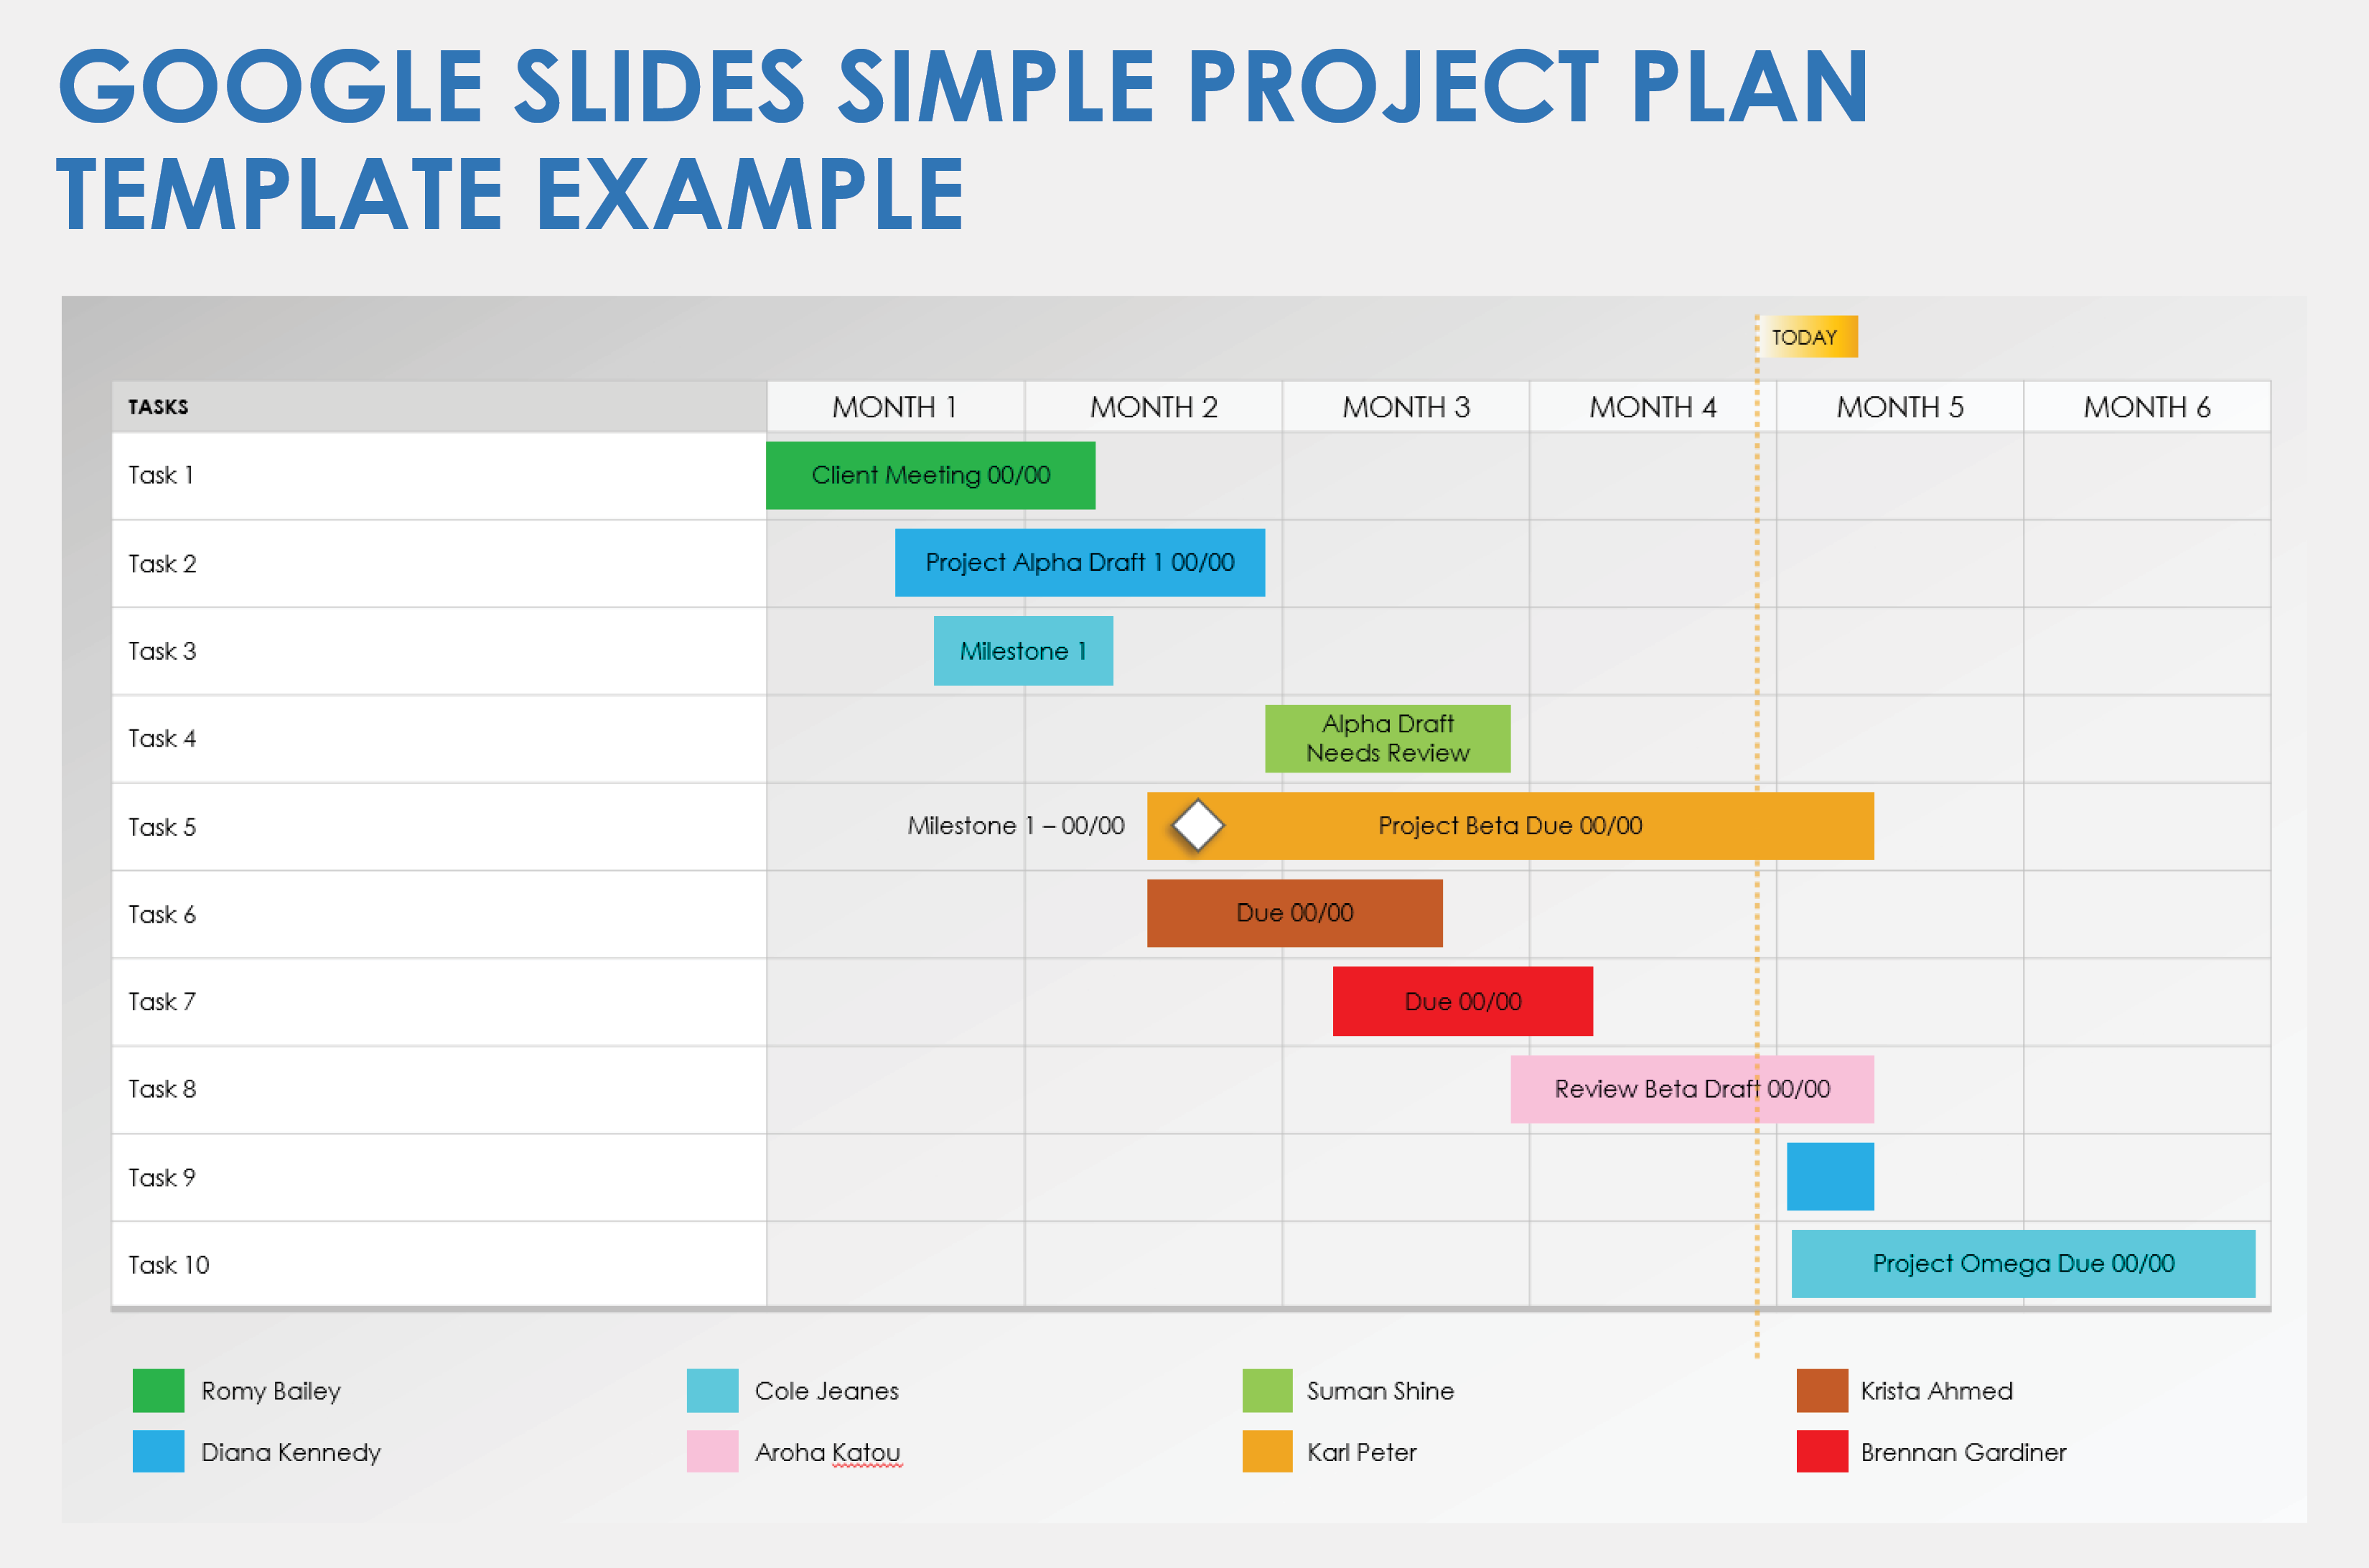 Simple Project Plan Example Template Google Slides